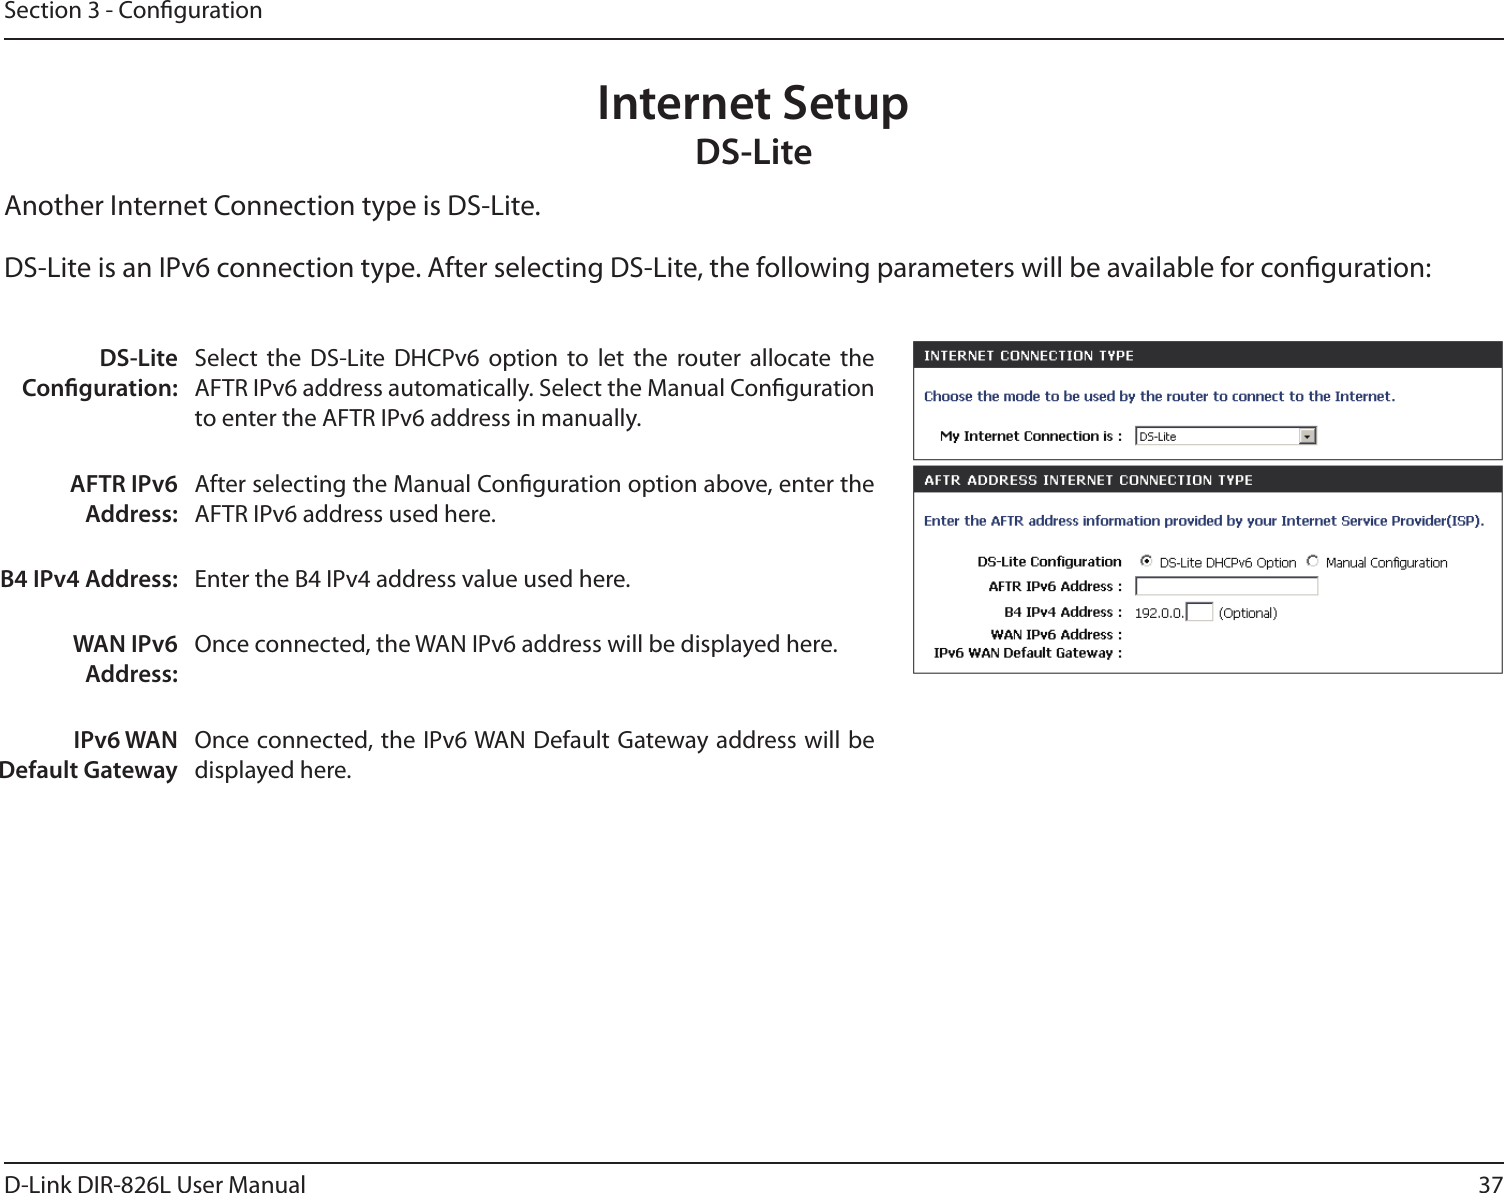 37D-Link DIR-826L User ManualSection 3 - CongurationInternet SetupDS-LiteAnother Internet Connection type is DS-Lite.DS-Lite Conguration:Select  the  DS-Lite  DHCPv6  option  to  let  the  router  allocate  the AFTR IPv6 address automatically. Select the Manual Conguration to enter the AFTR IPv6 address in manually.AFTR IPv6 Address:After selecting the Manual Conguration option above, enter the AFTR IPv6 address used here.B4 IPv4 Address: Enter the B4 IPv4 address value used here.WAN IPv6 Address:Once connected, the WAN IPv6 address will be displayed here.IPv6 WAN Default GatewayOnce connected, the IPv6 WAN Default Gateway address will be displayed here.DS-Lite is an IPv6 connection type. After selecting DS-Lite, the following parameters will be available for conguration: